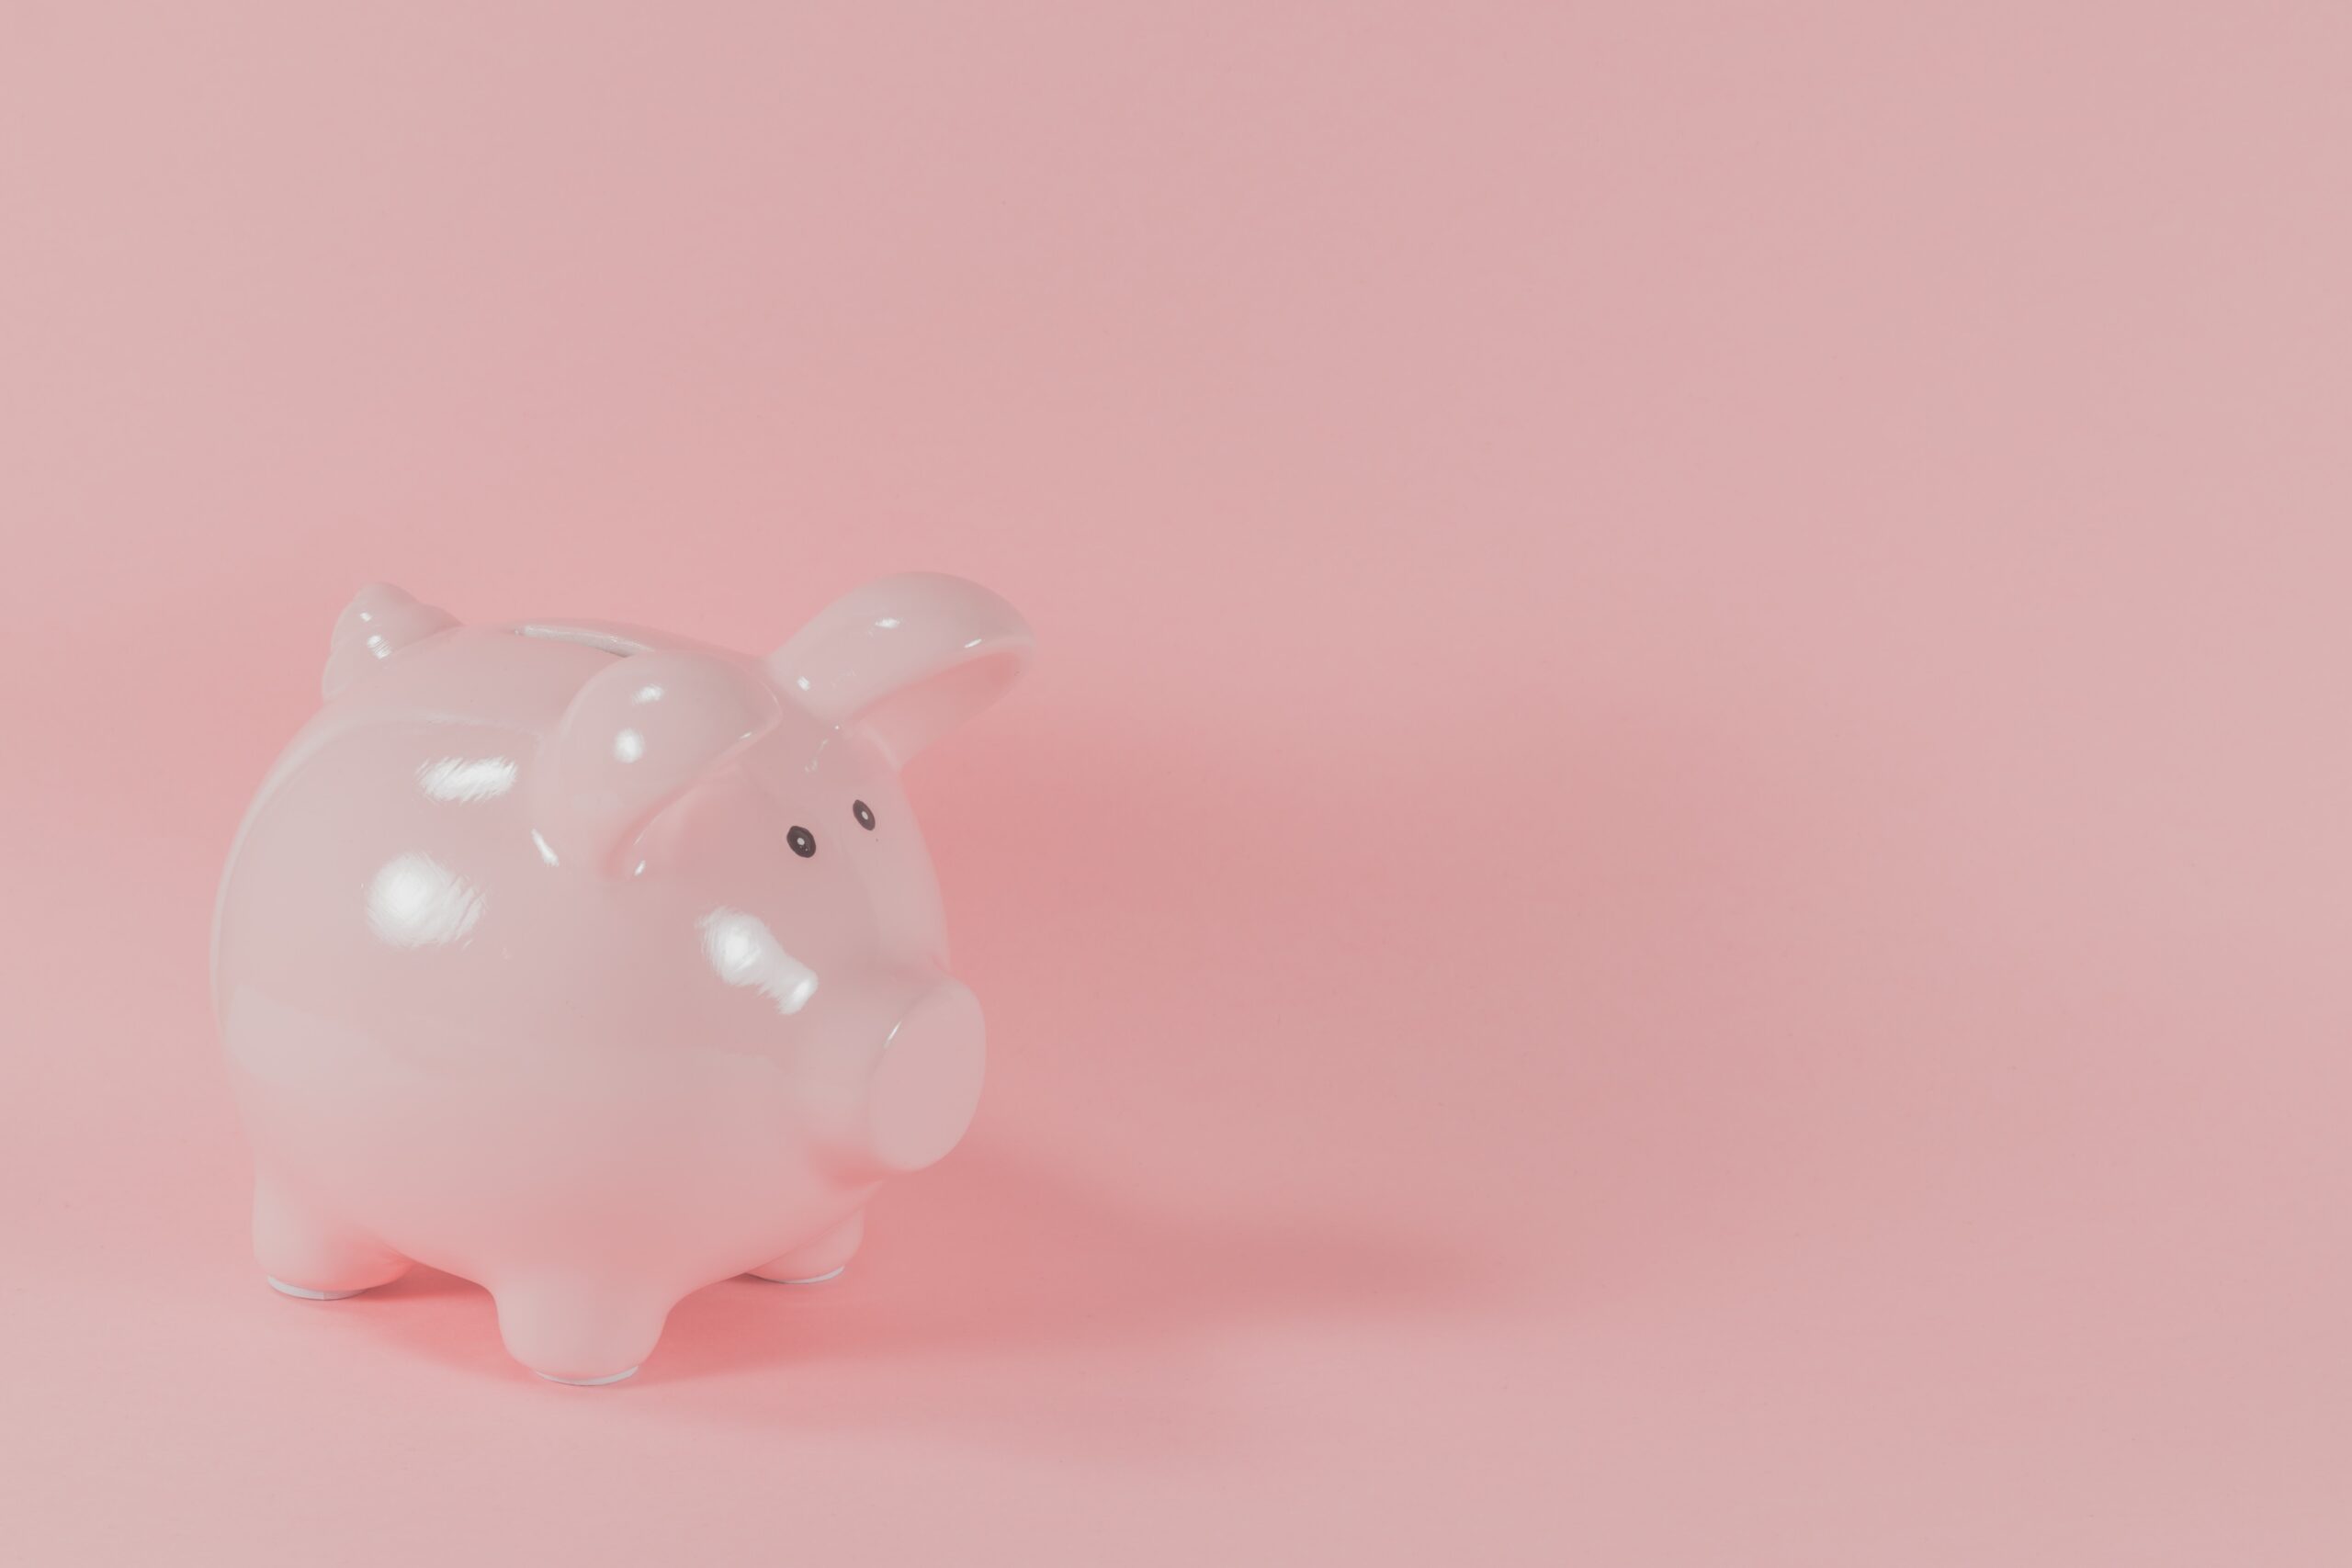 Pink piggy bank against a pink background